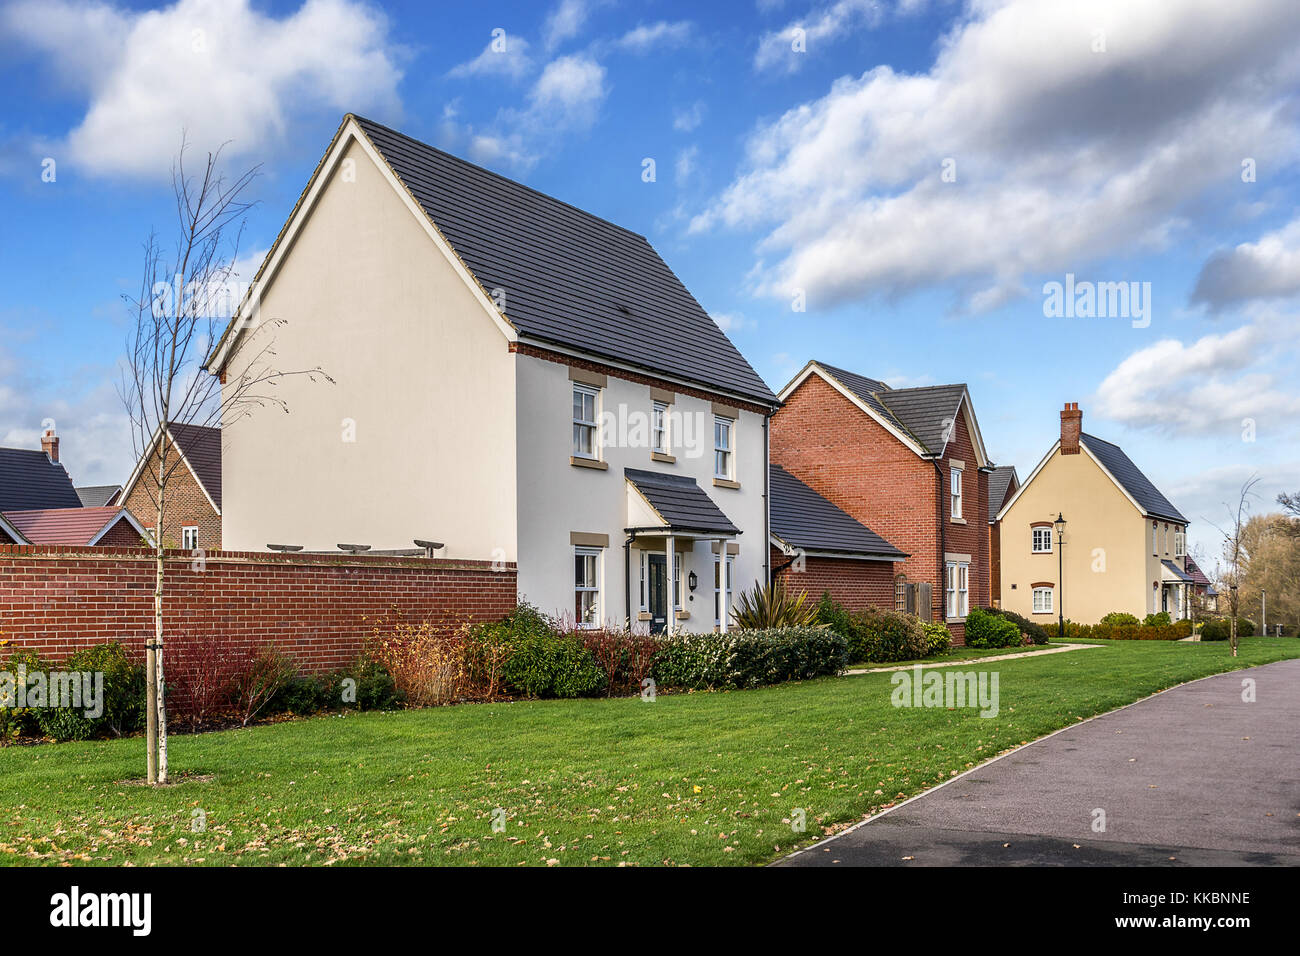 Urban housing in the south of England Stock Photo